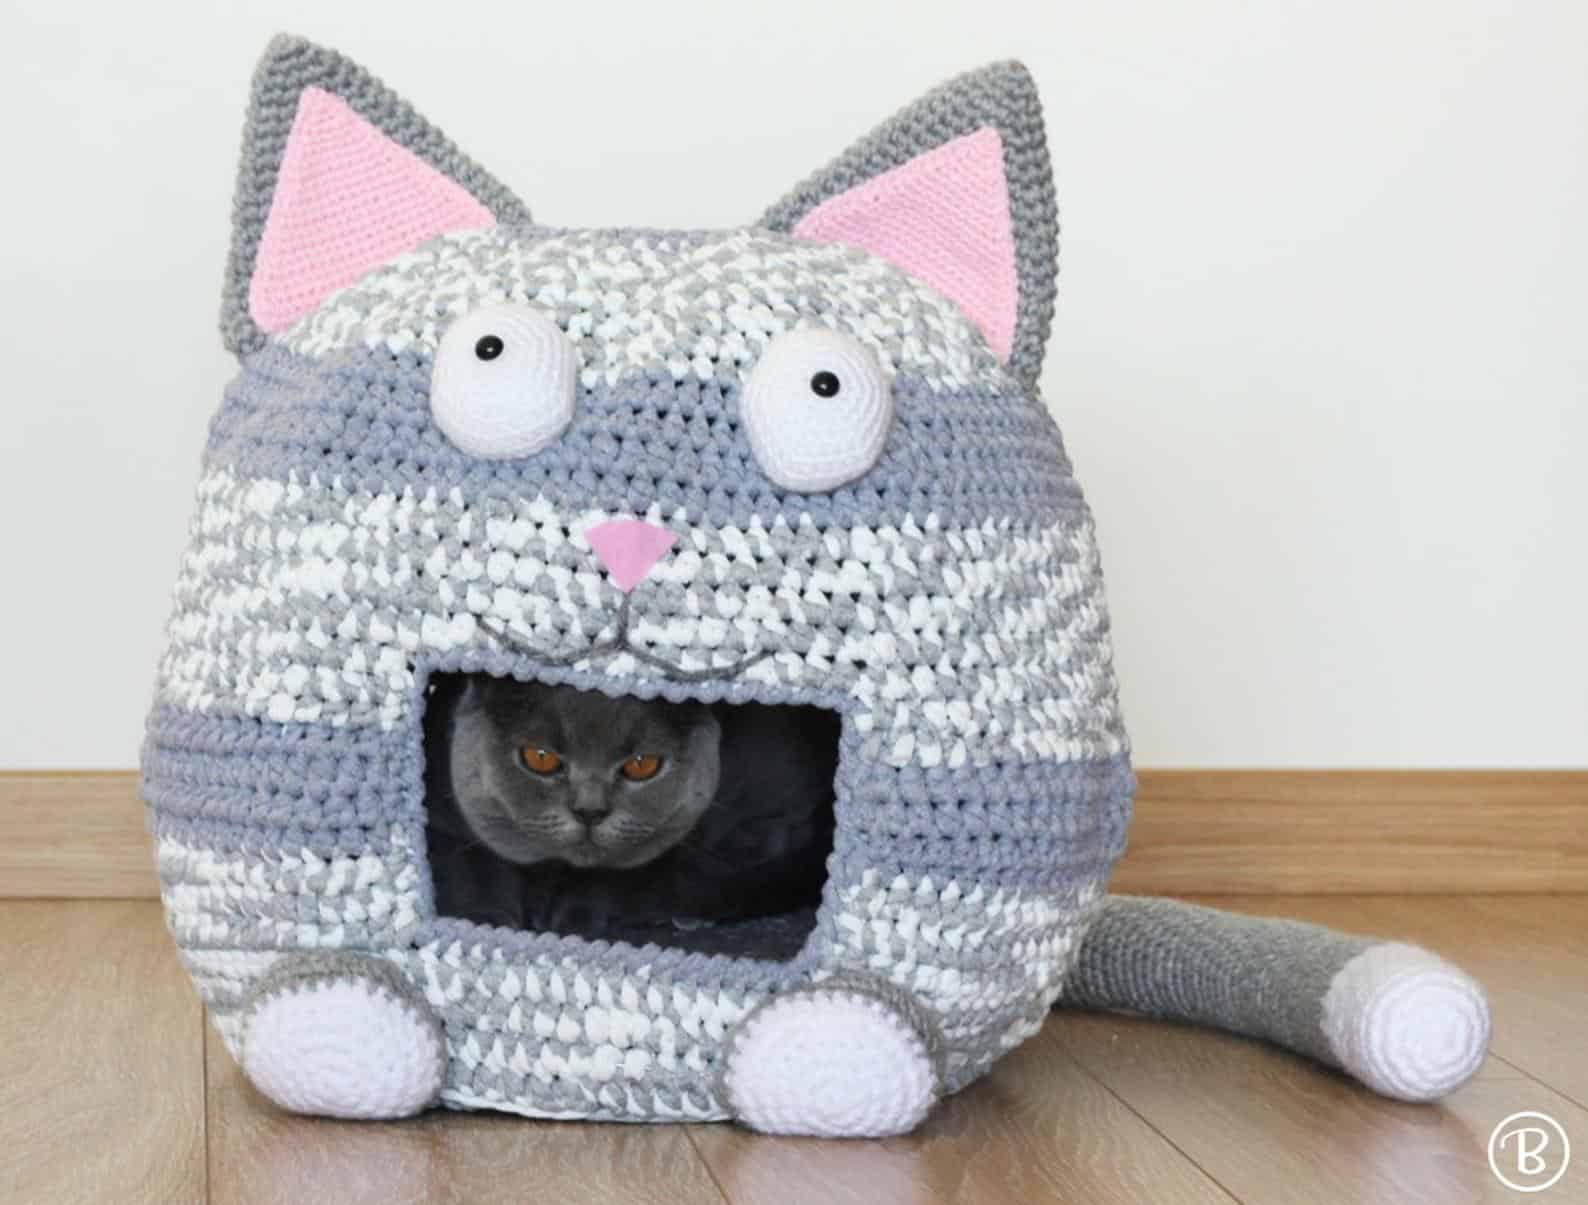 Cat shaped crocheted kitty bed